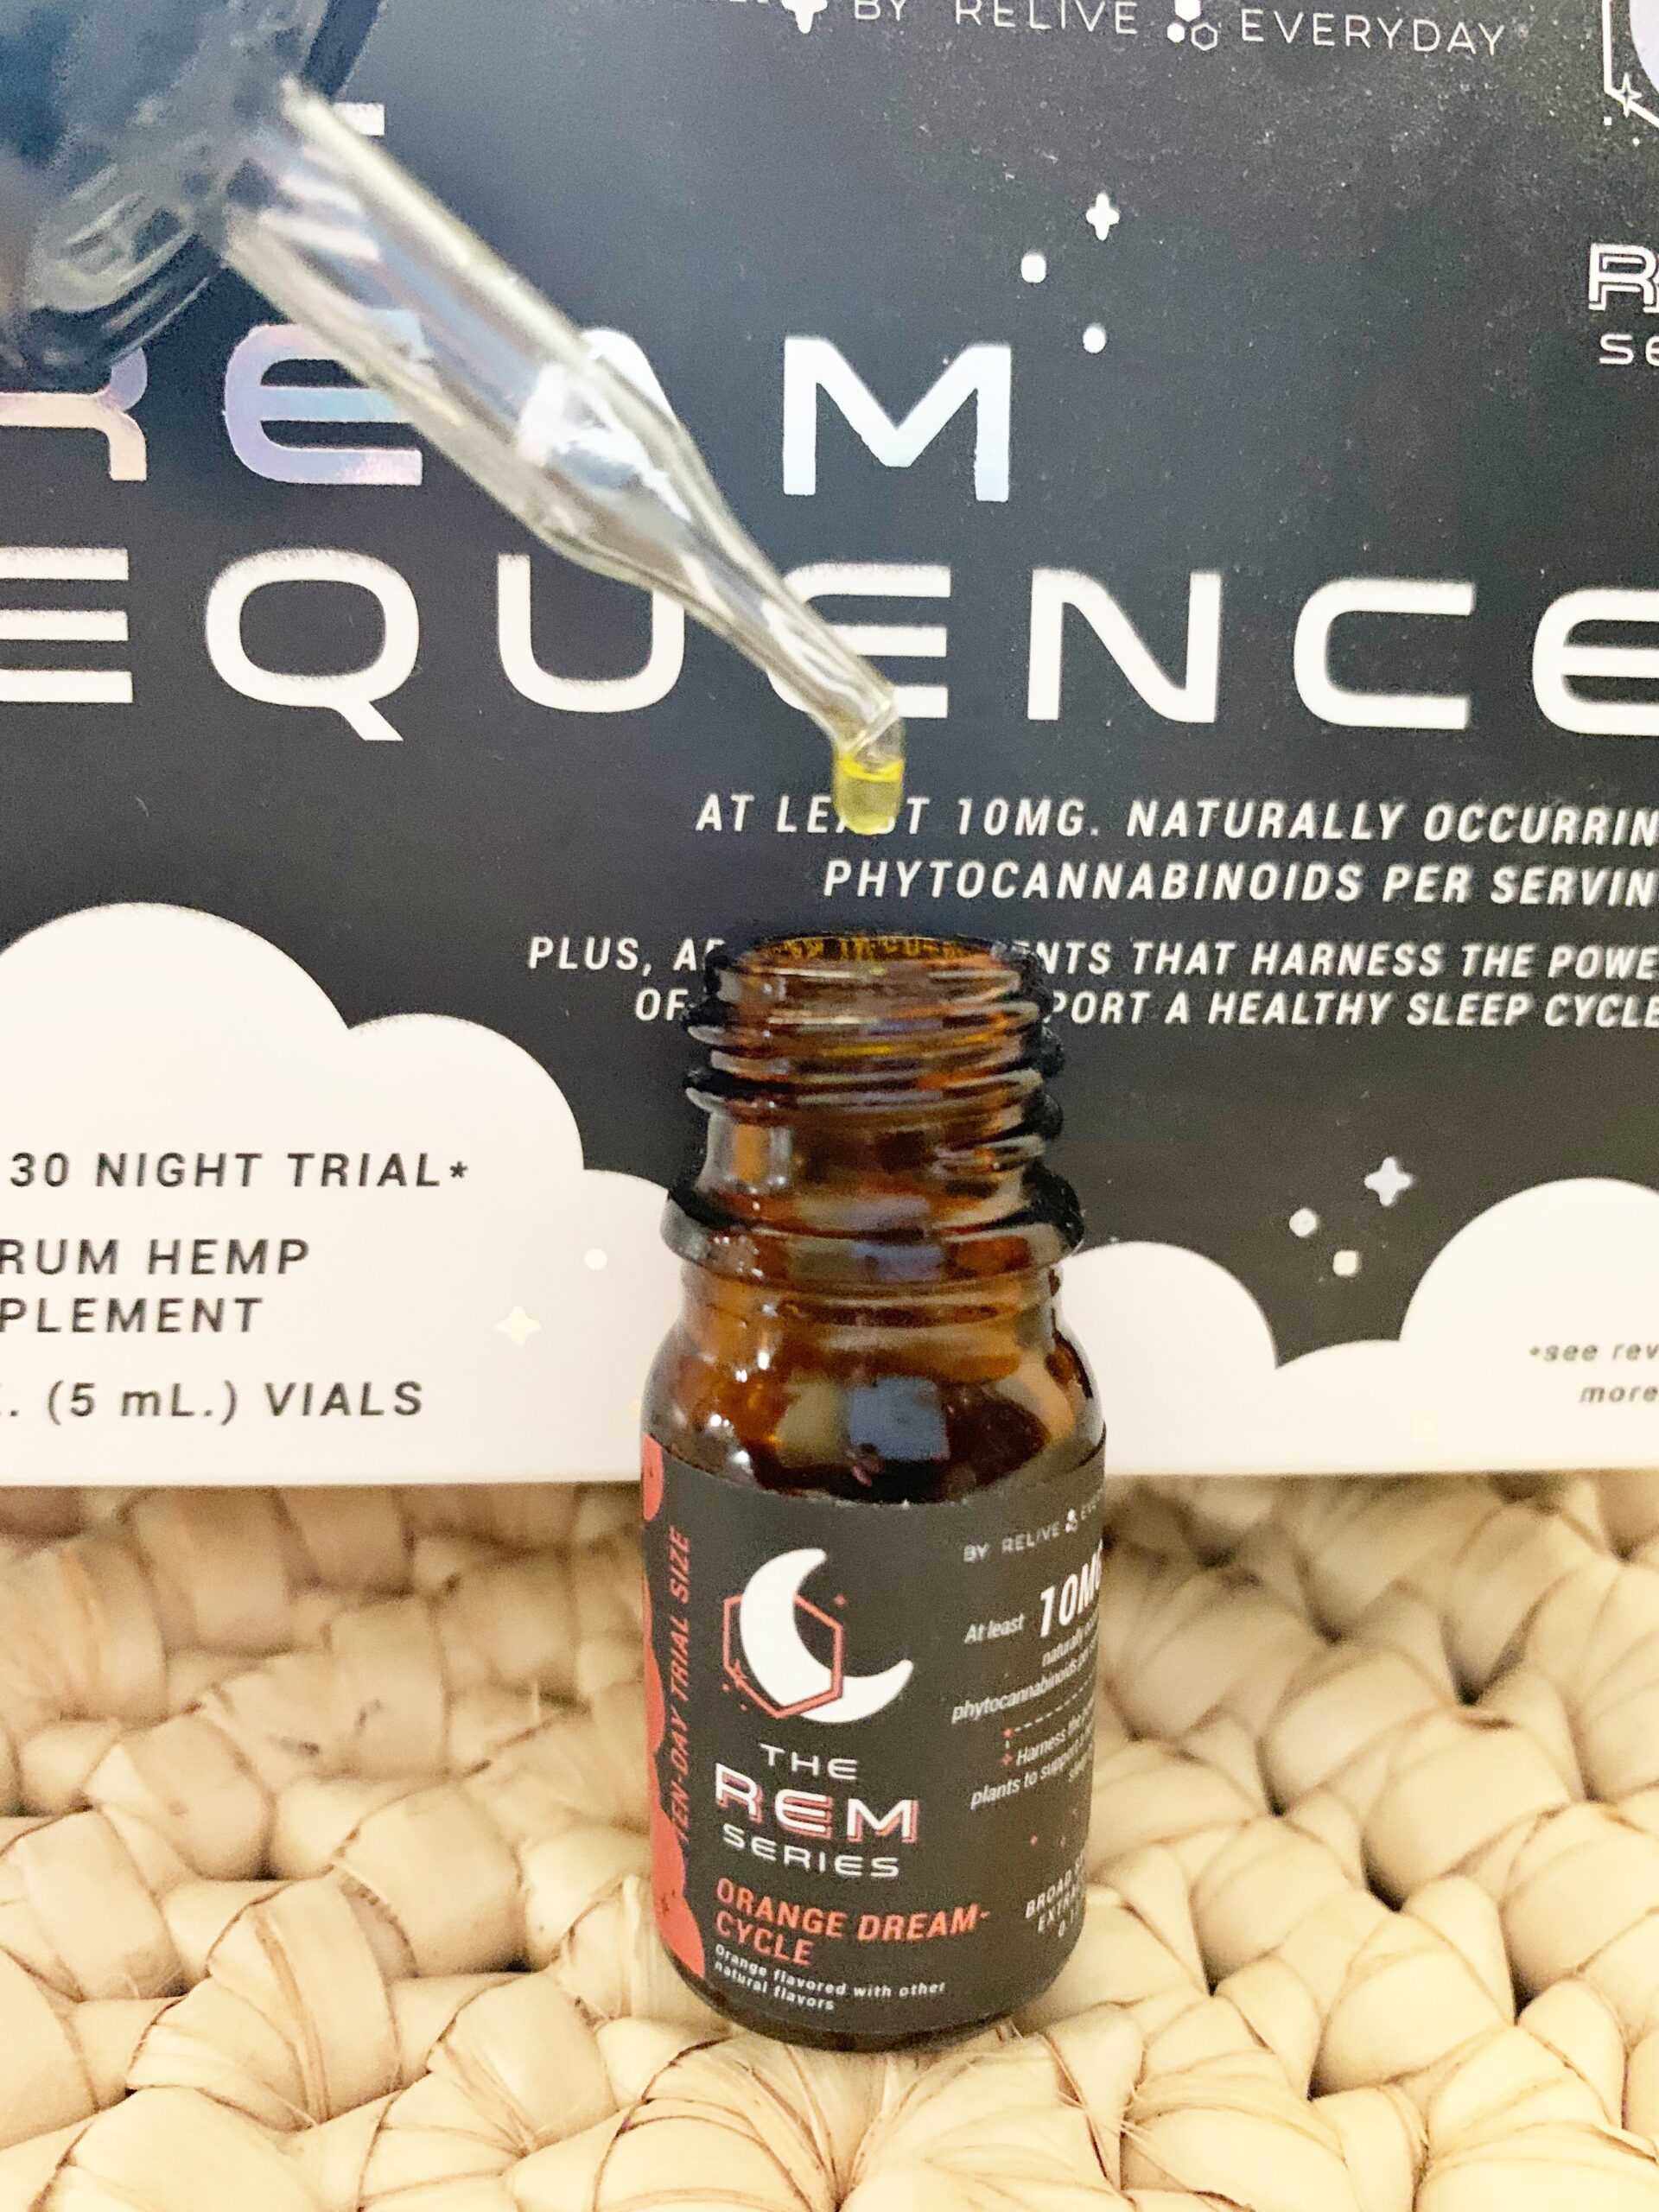 Relive Everyday CBD Oil Tinctures - REM Sequence